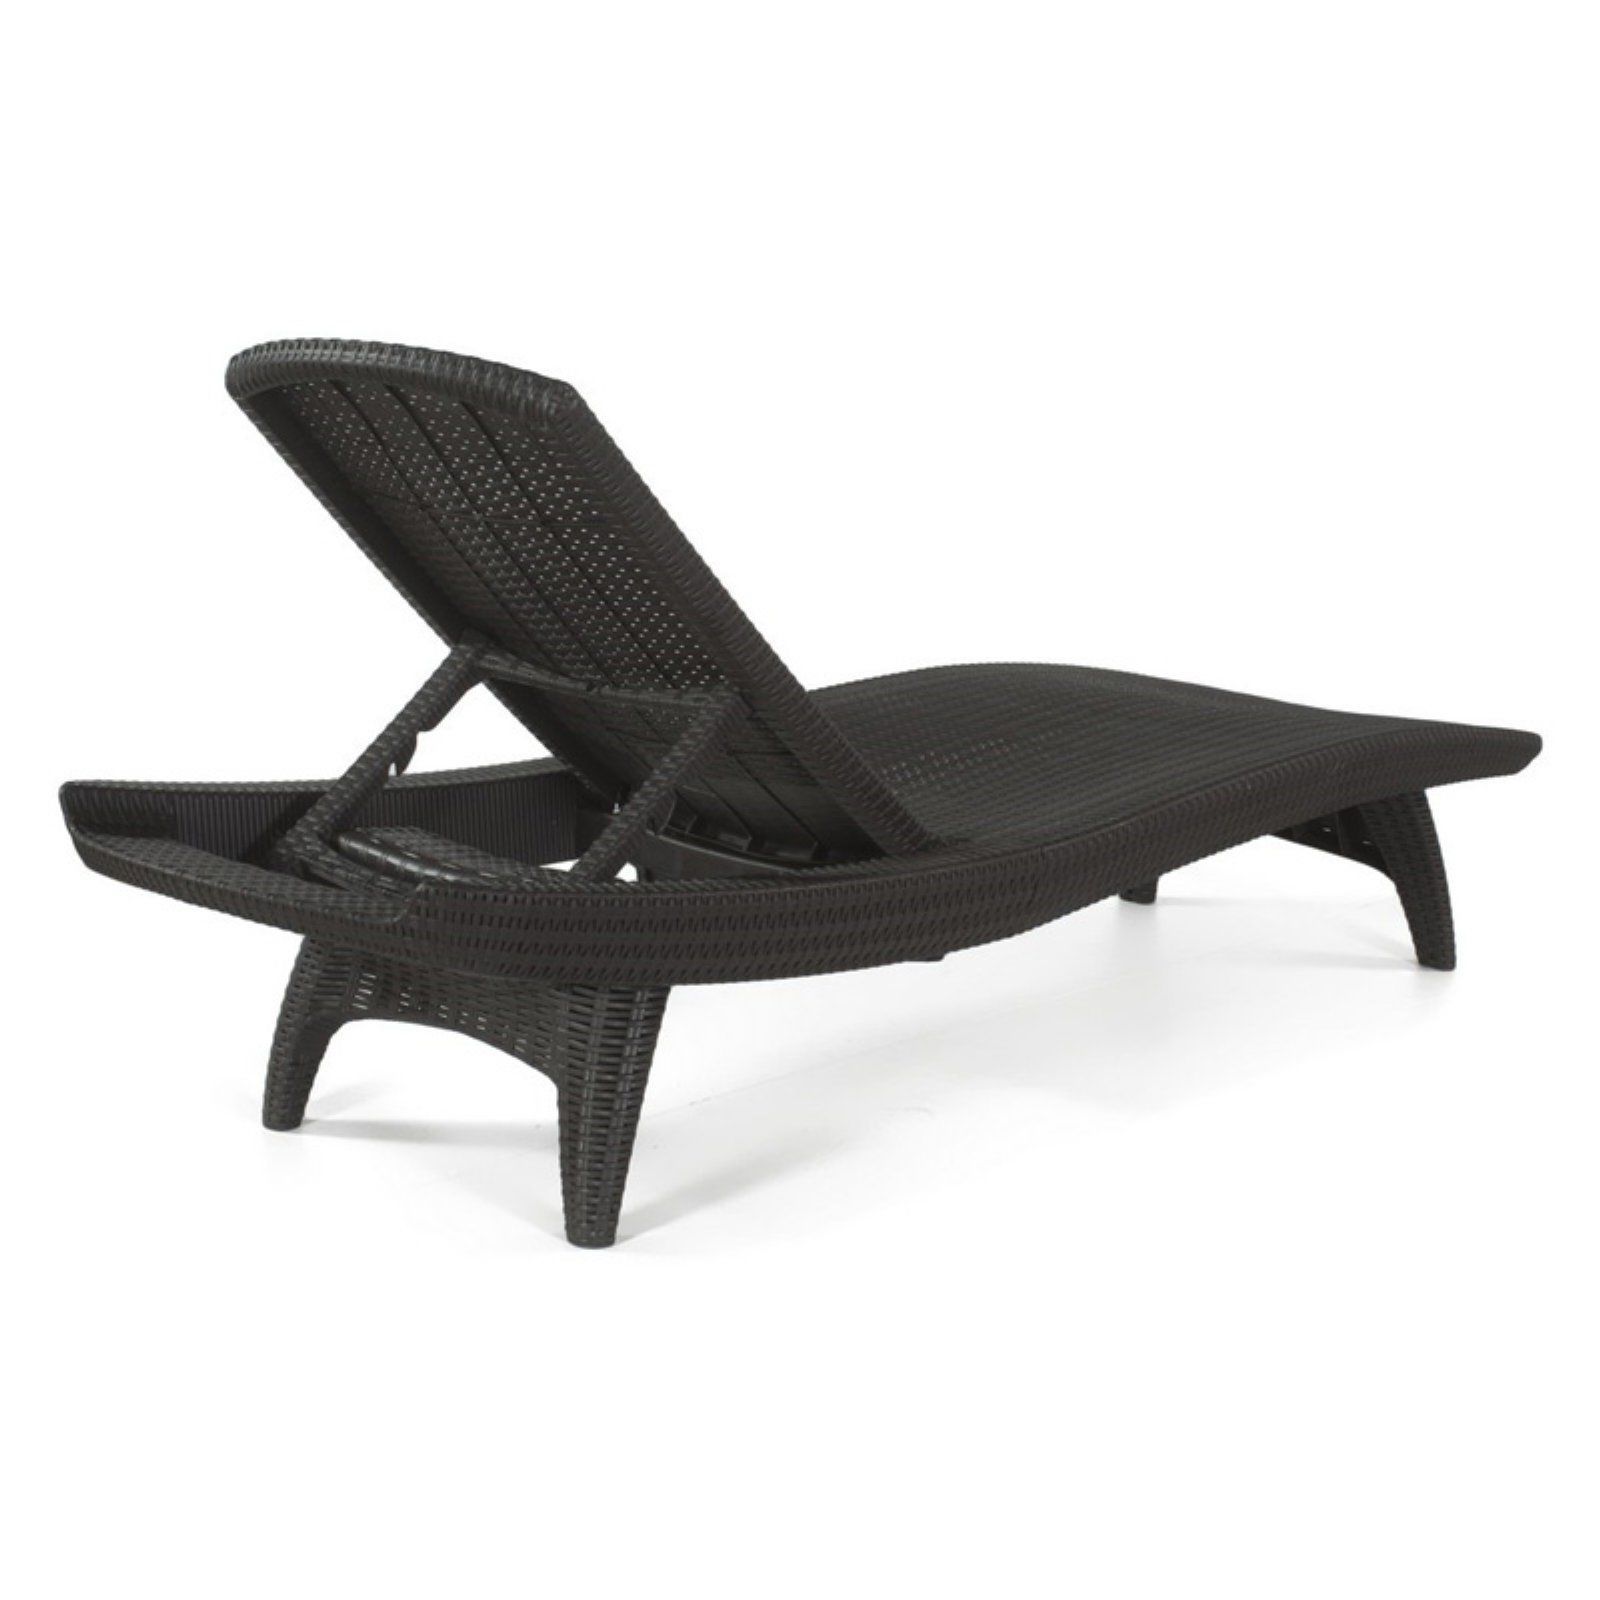 Most Current Keter Chaise Lounges Inside Rattan Chaise Lounge Wicker Outdoor Patio Brown Chair Furniture (View 14 of 15)